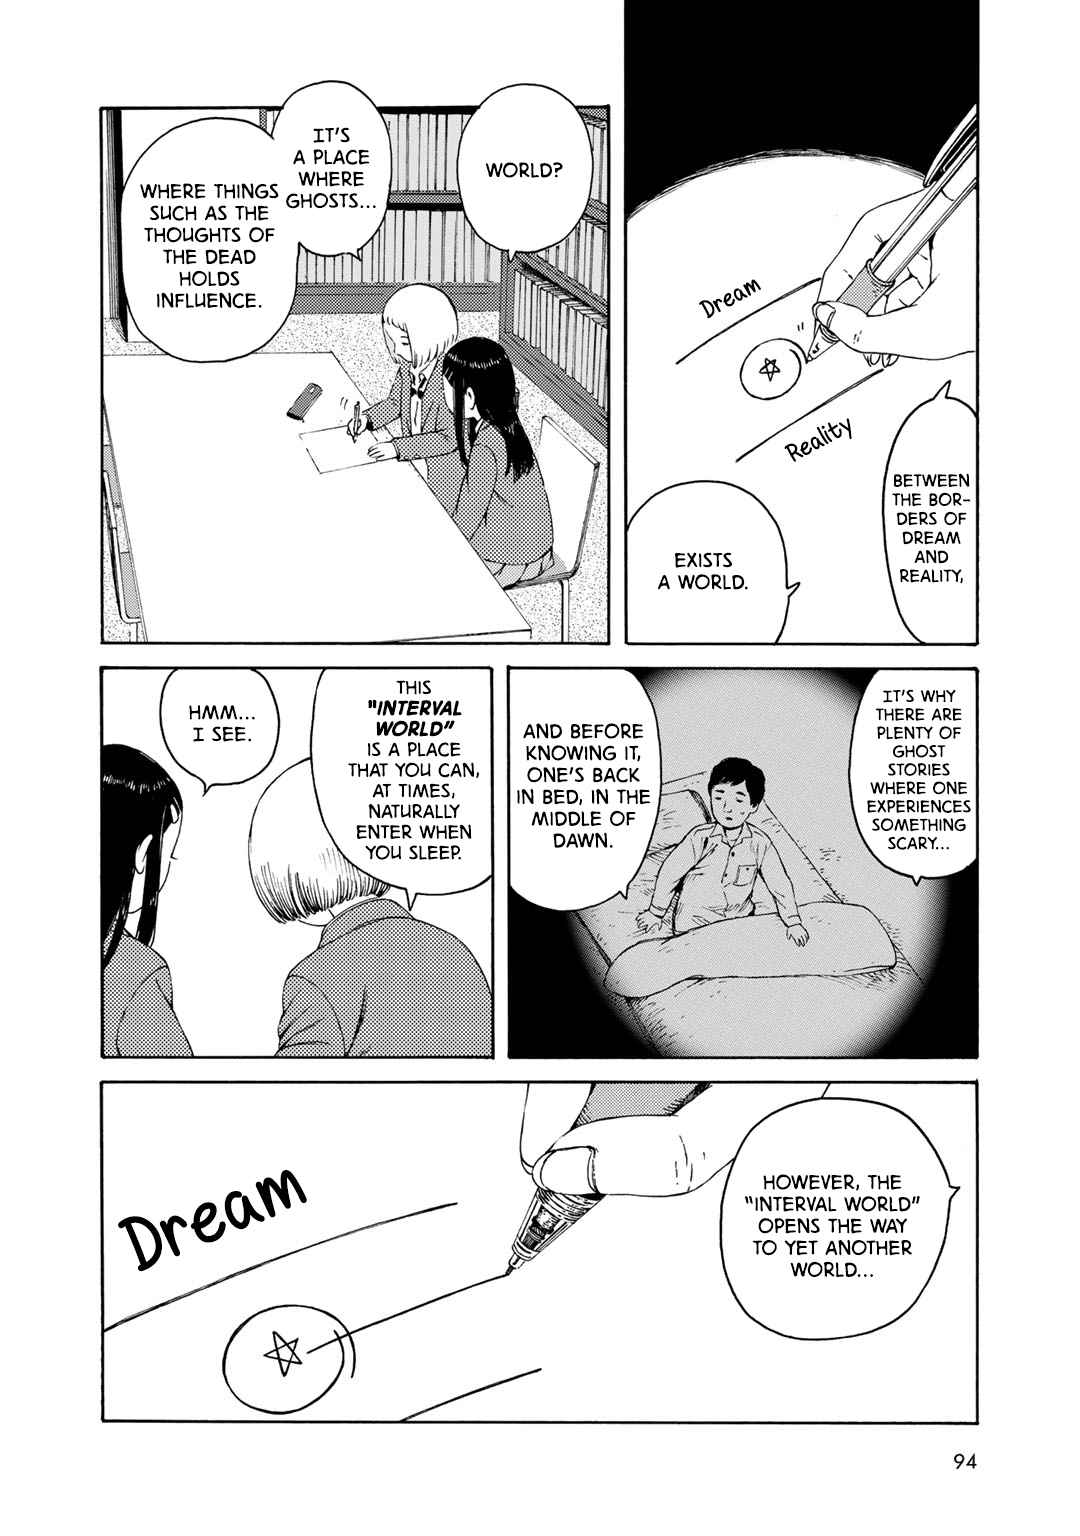 Wakusei Closet Vol. 1 Ch. 5 The World Between Dream and Reality